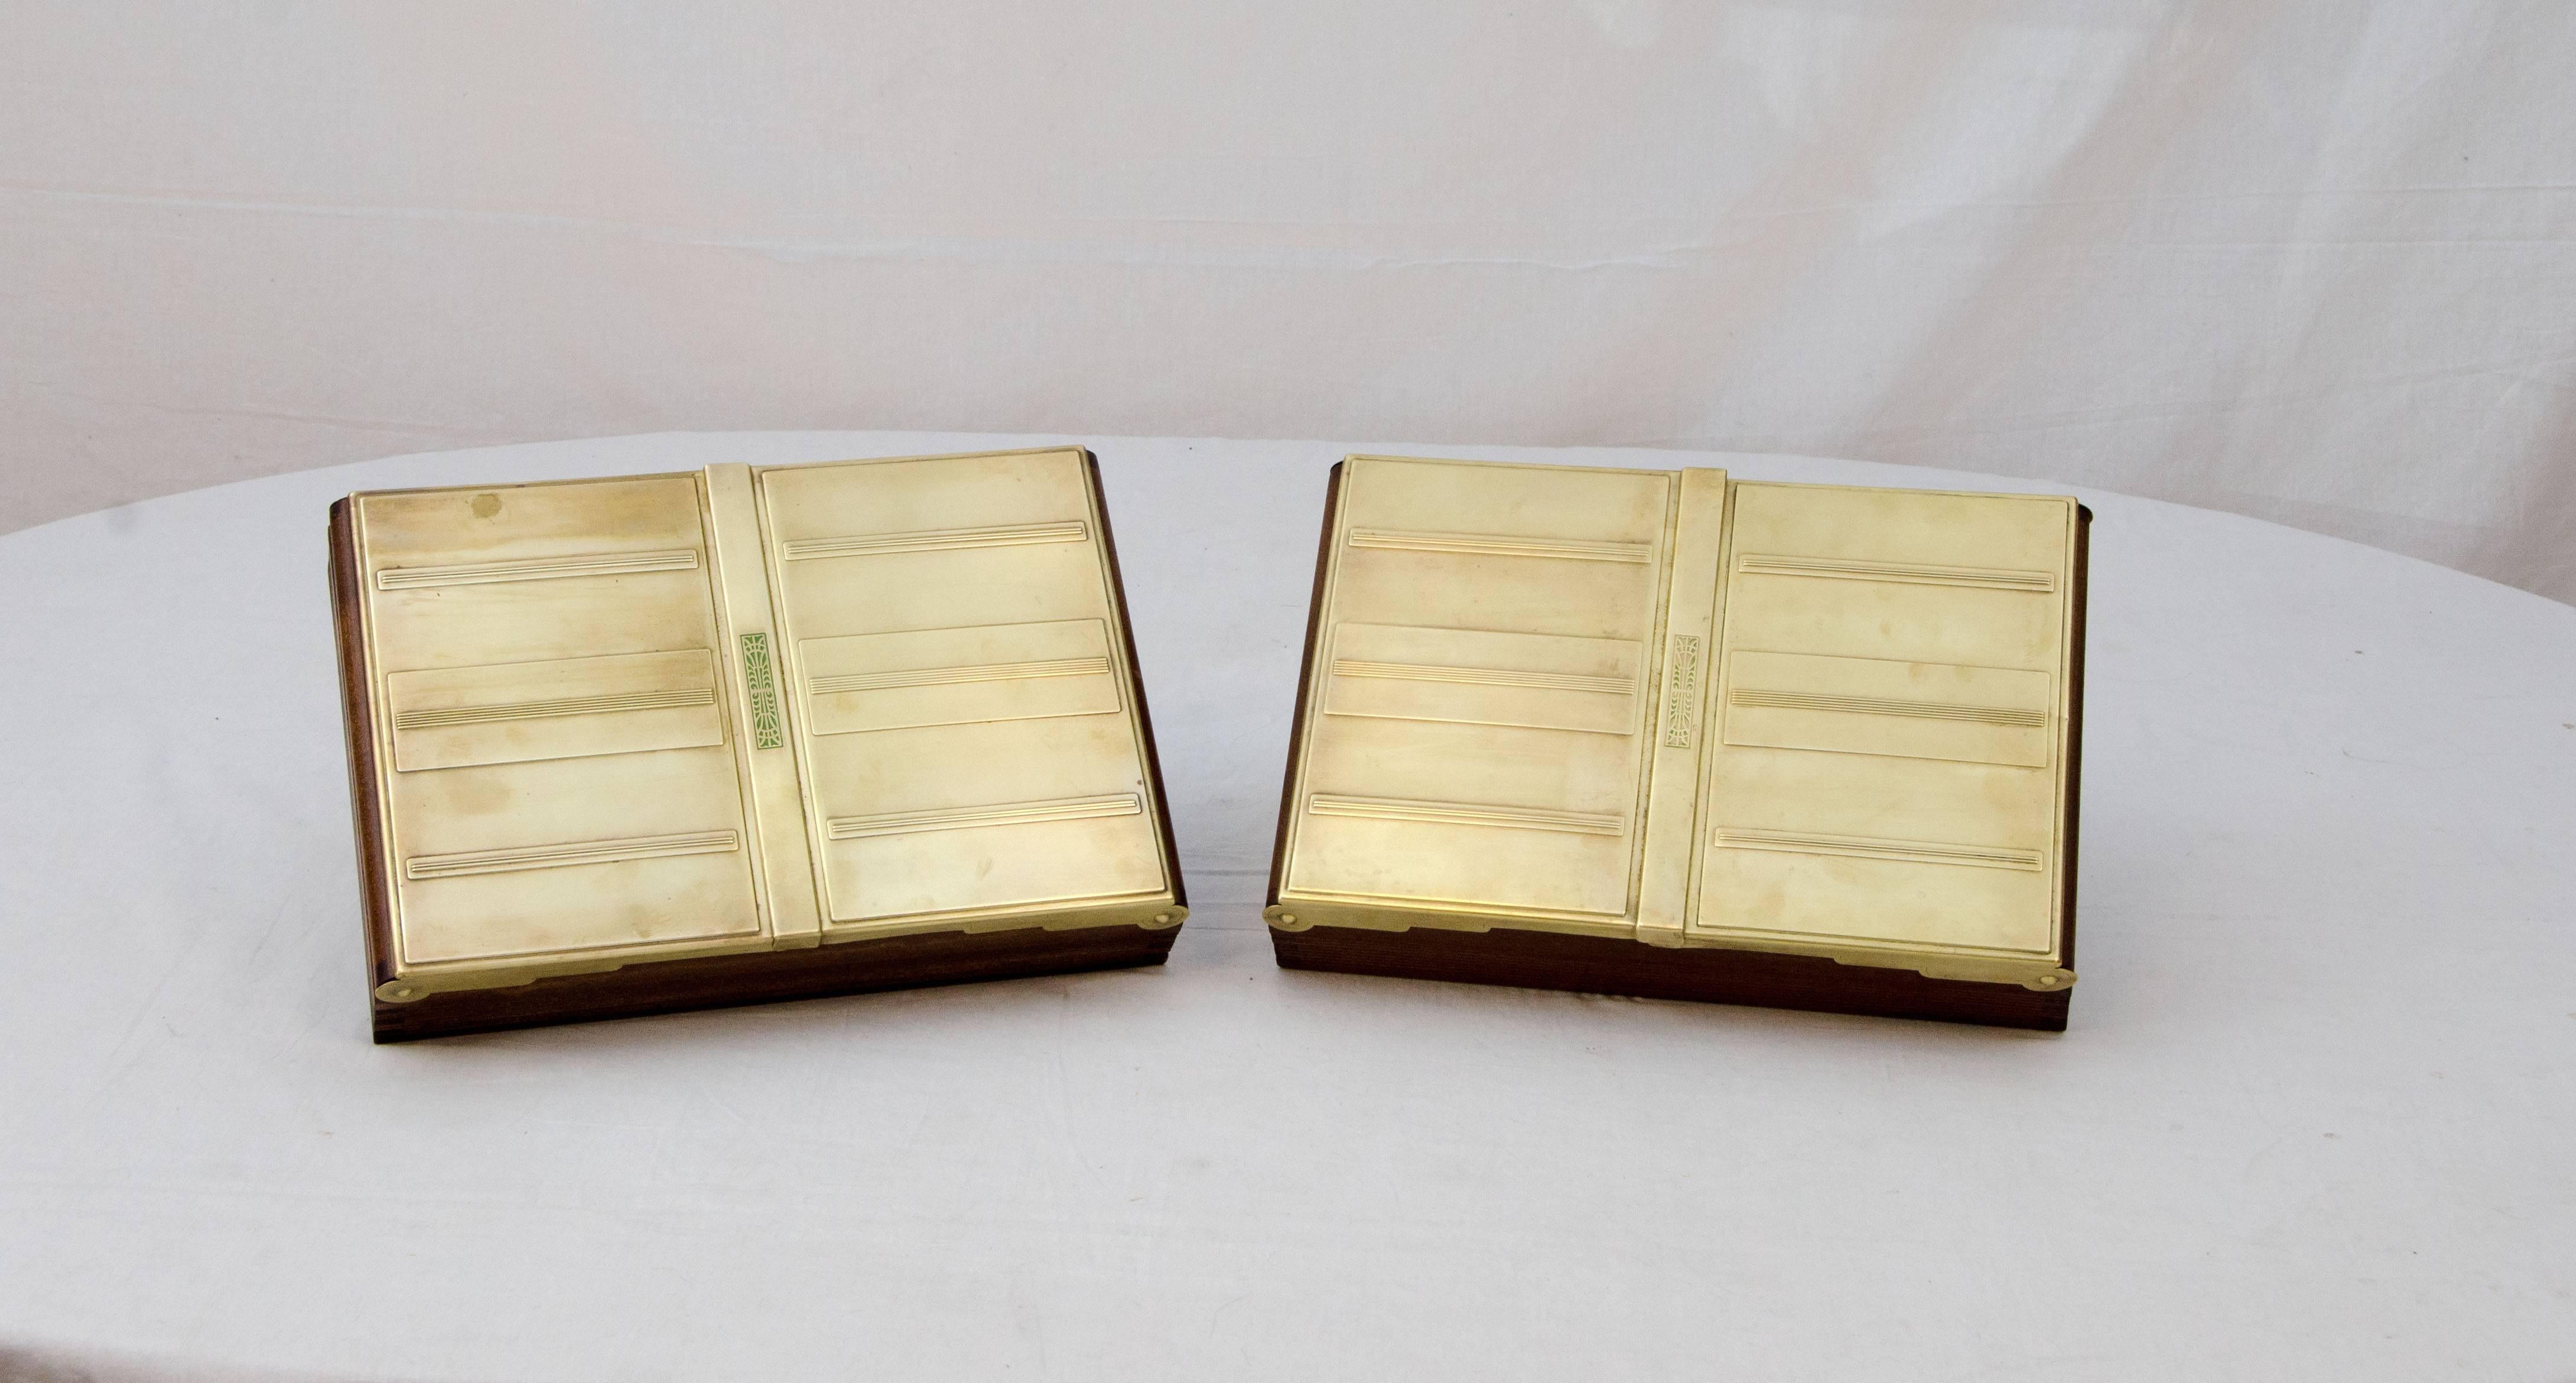 Interesting Art Deco boxes with two part top that lifts up. One half has an Art Deco accent design. Good for jewelry, letter storage or whatnots.